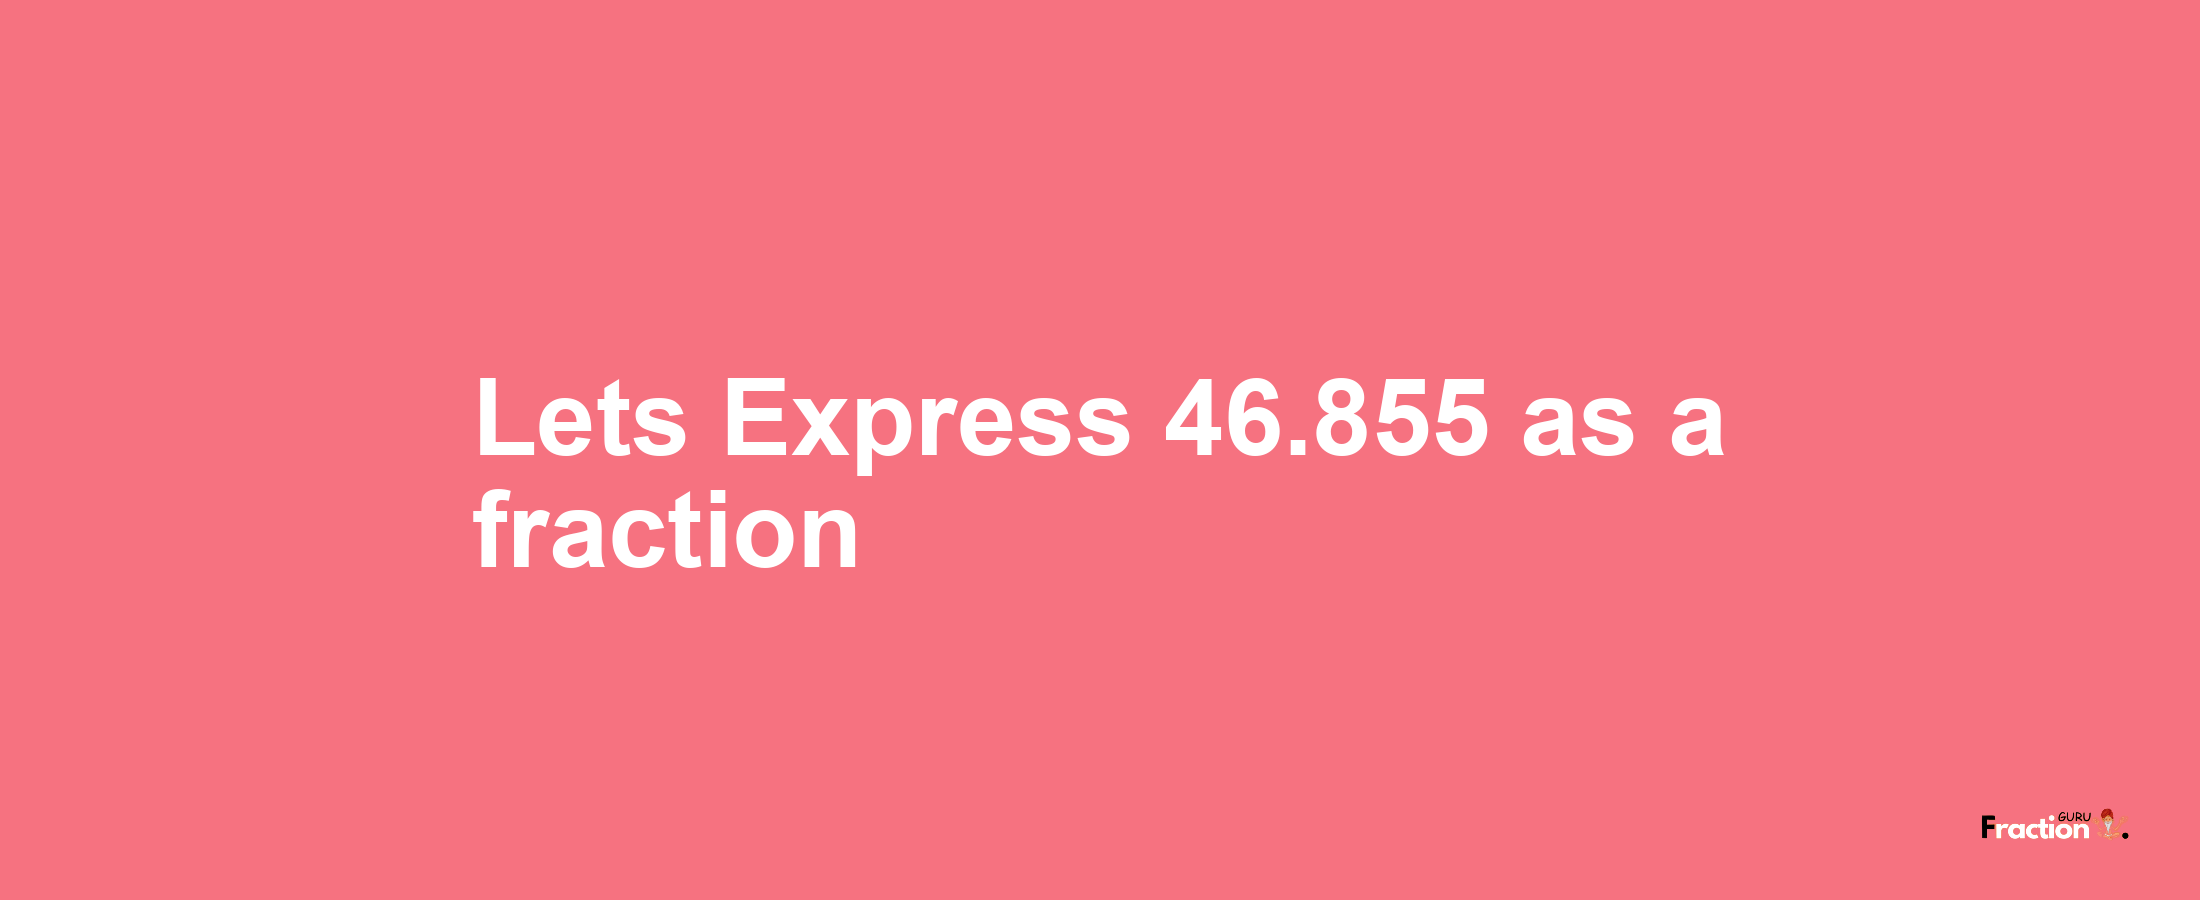 Lets Express 46.855 as afraction